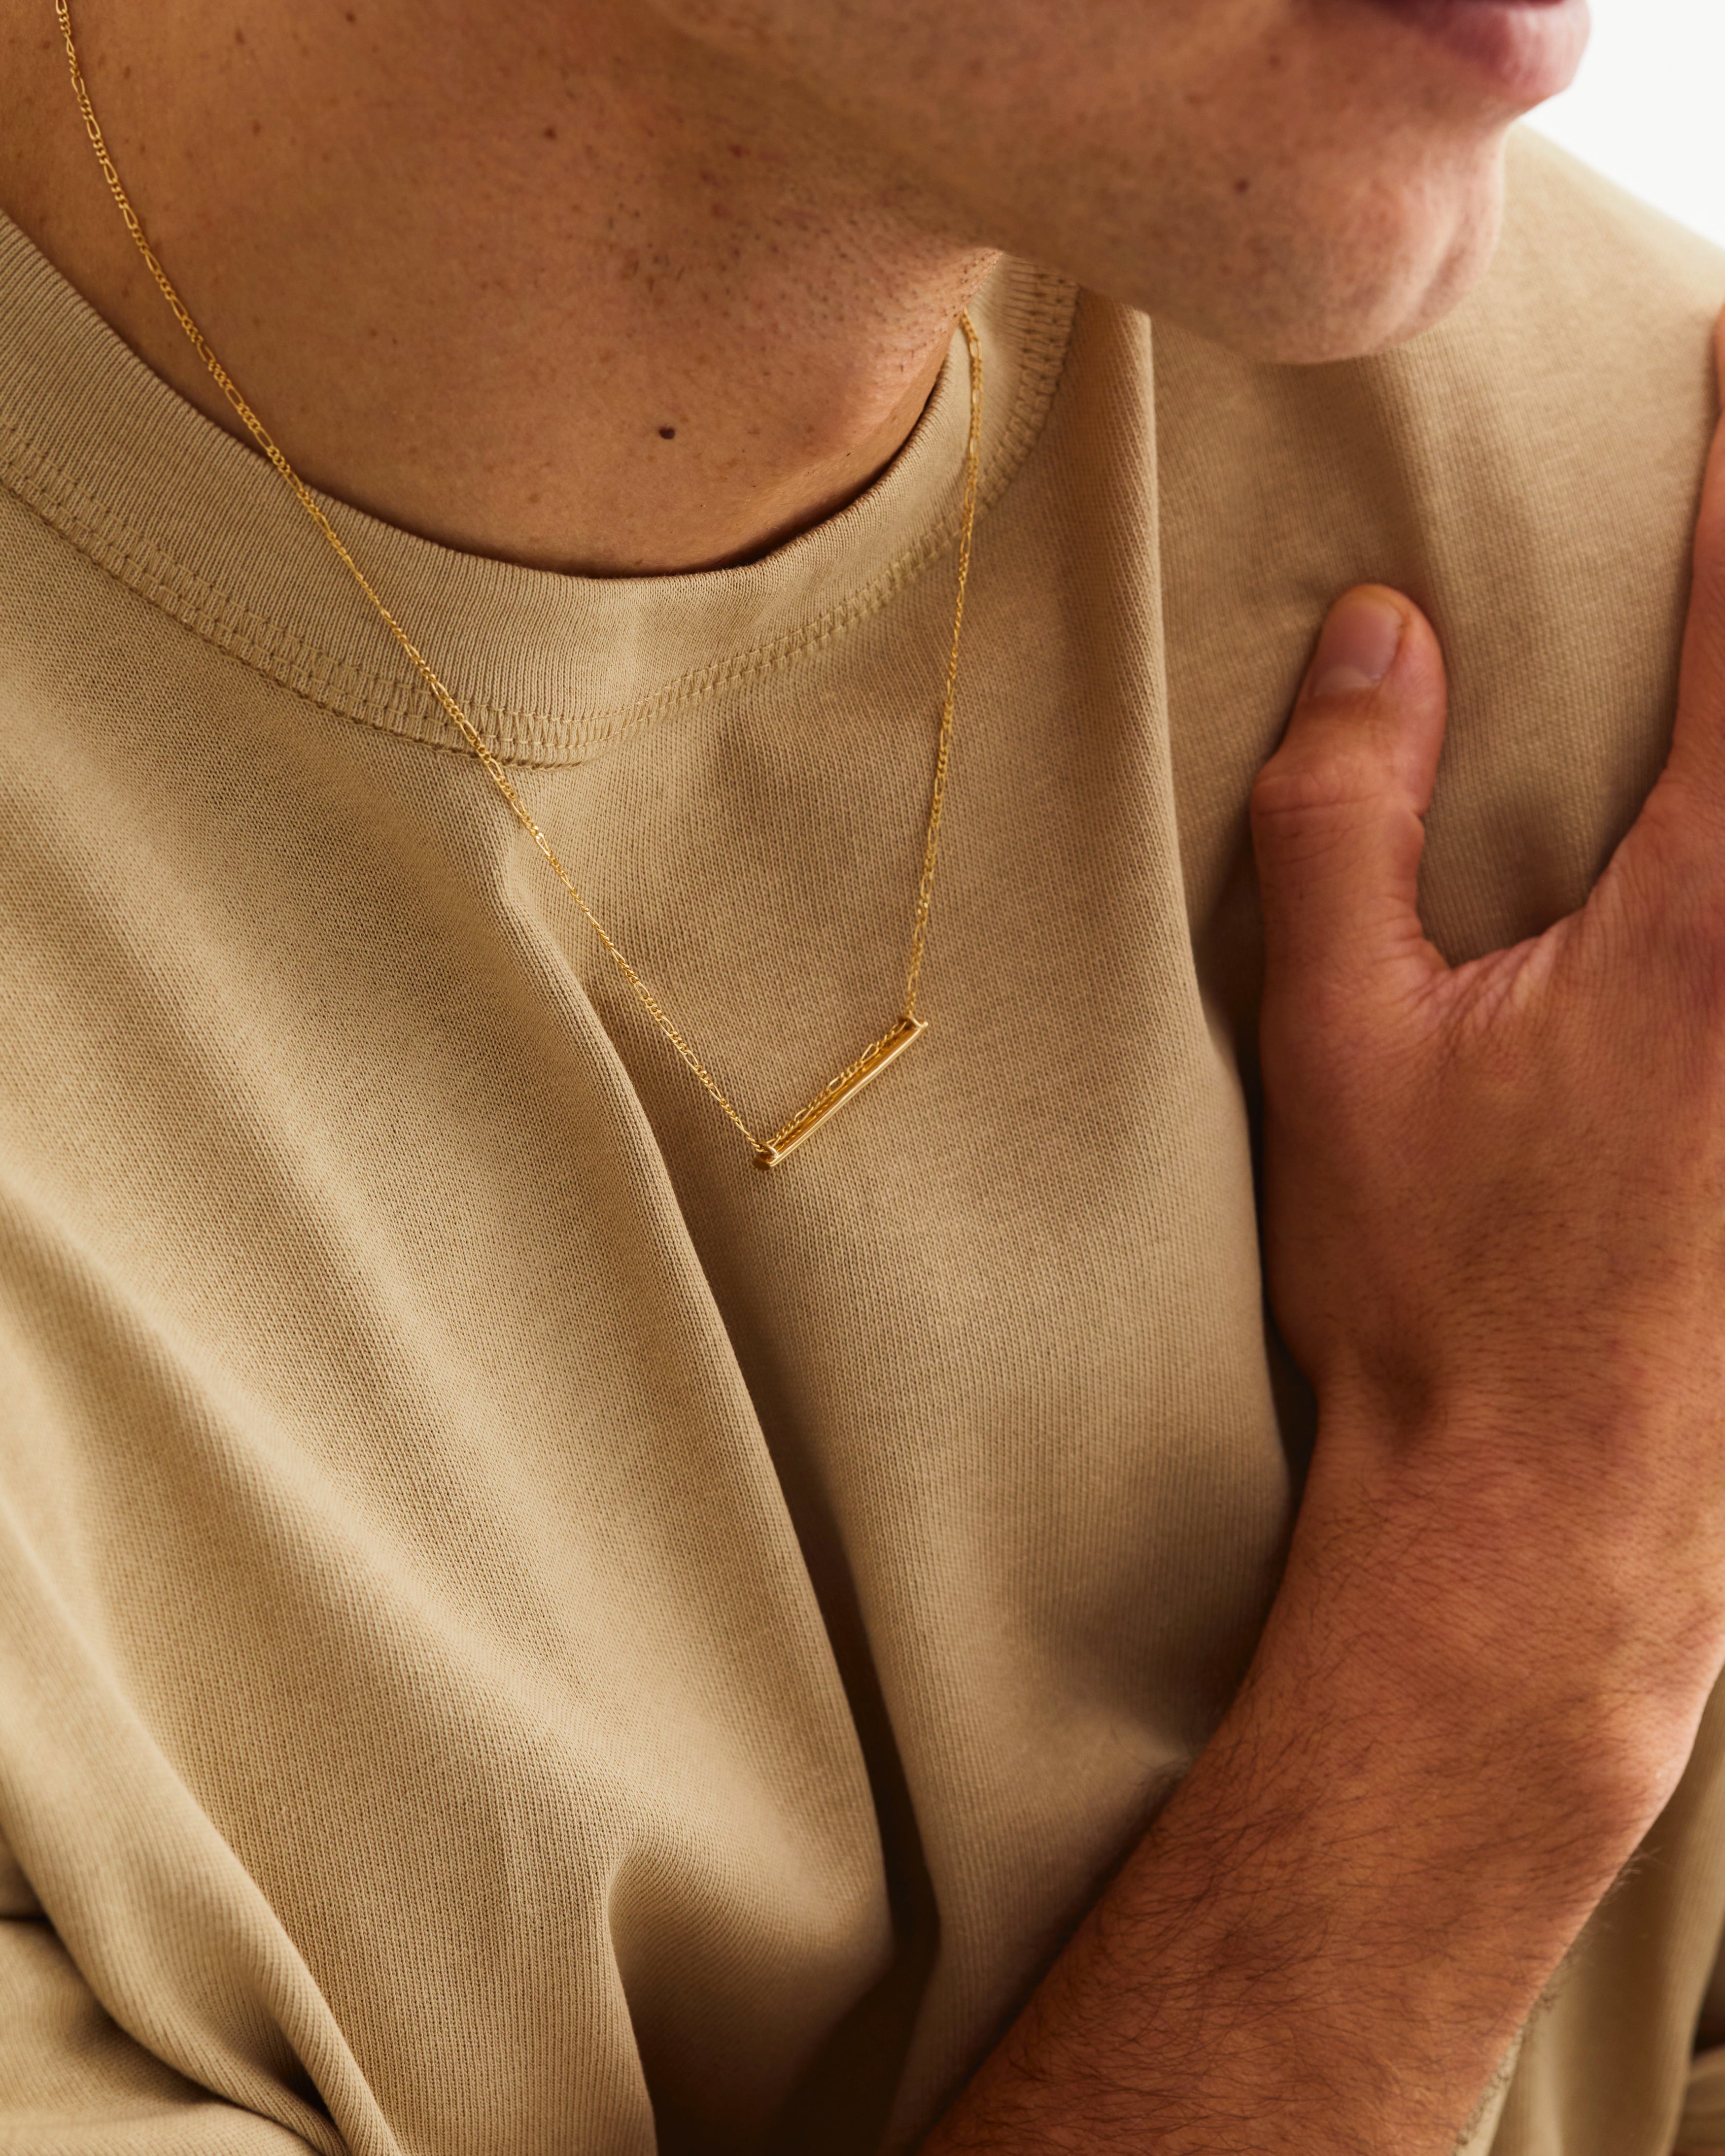 A man wears the Ellipse Necklace in yellow gold